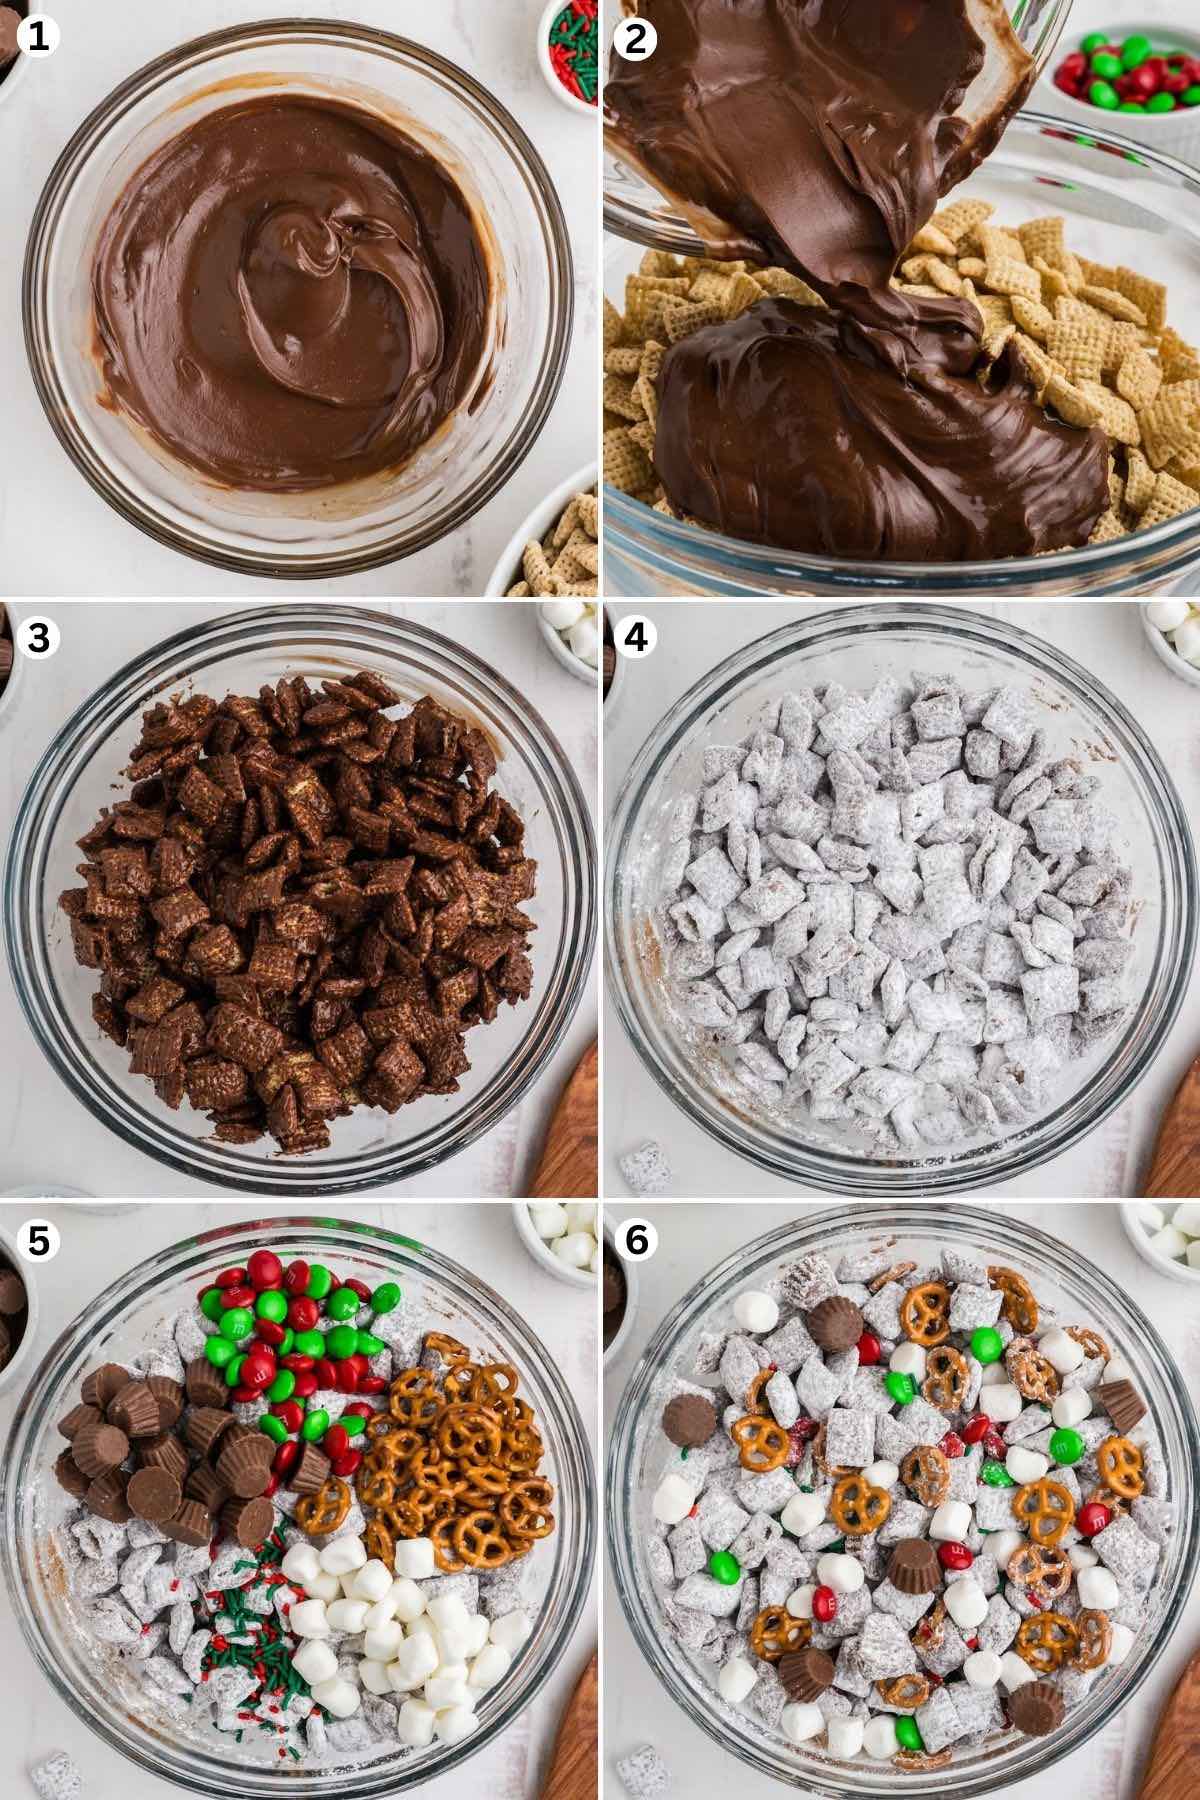 Chocolate mixture in a bowl. Add the chocolate mixture over cereal and stir. Stir in powdered sugar. Mix in the pretzels, M&Ms, Reese’s, marshmallows and sprinkles.